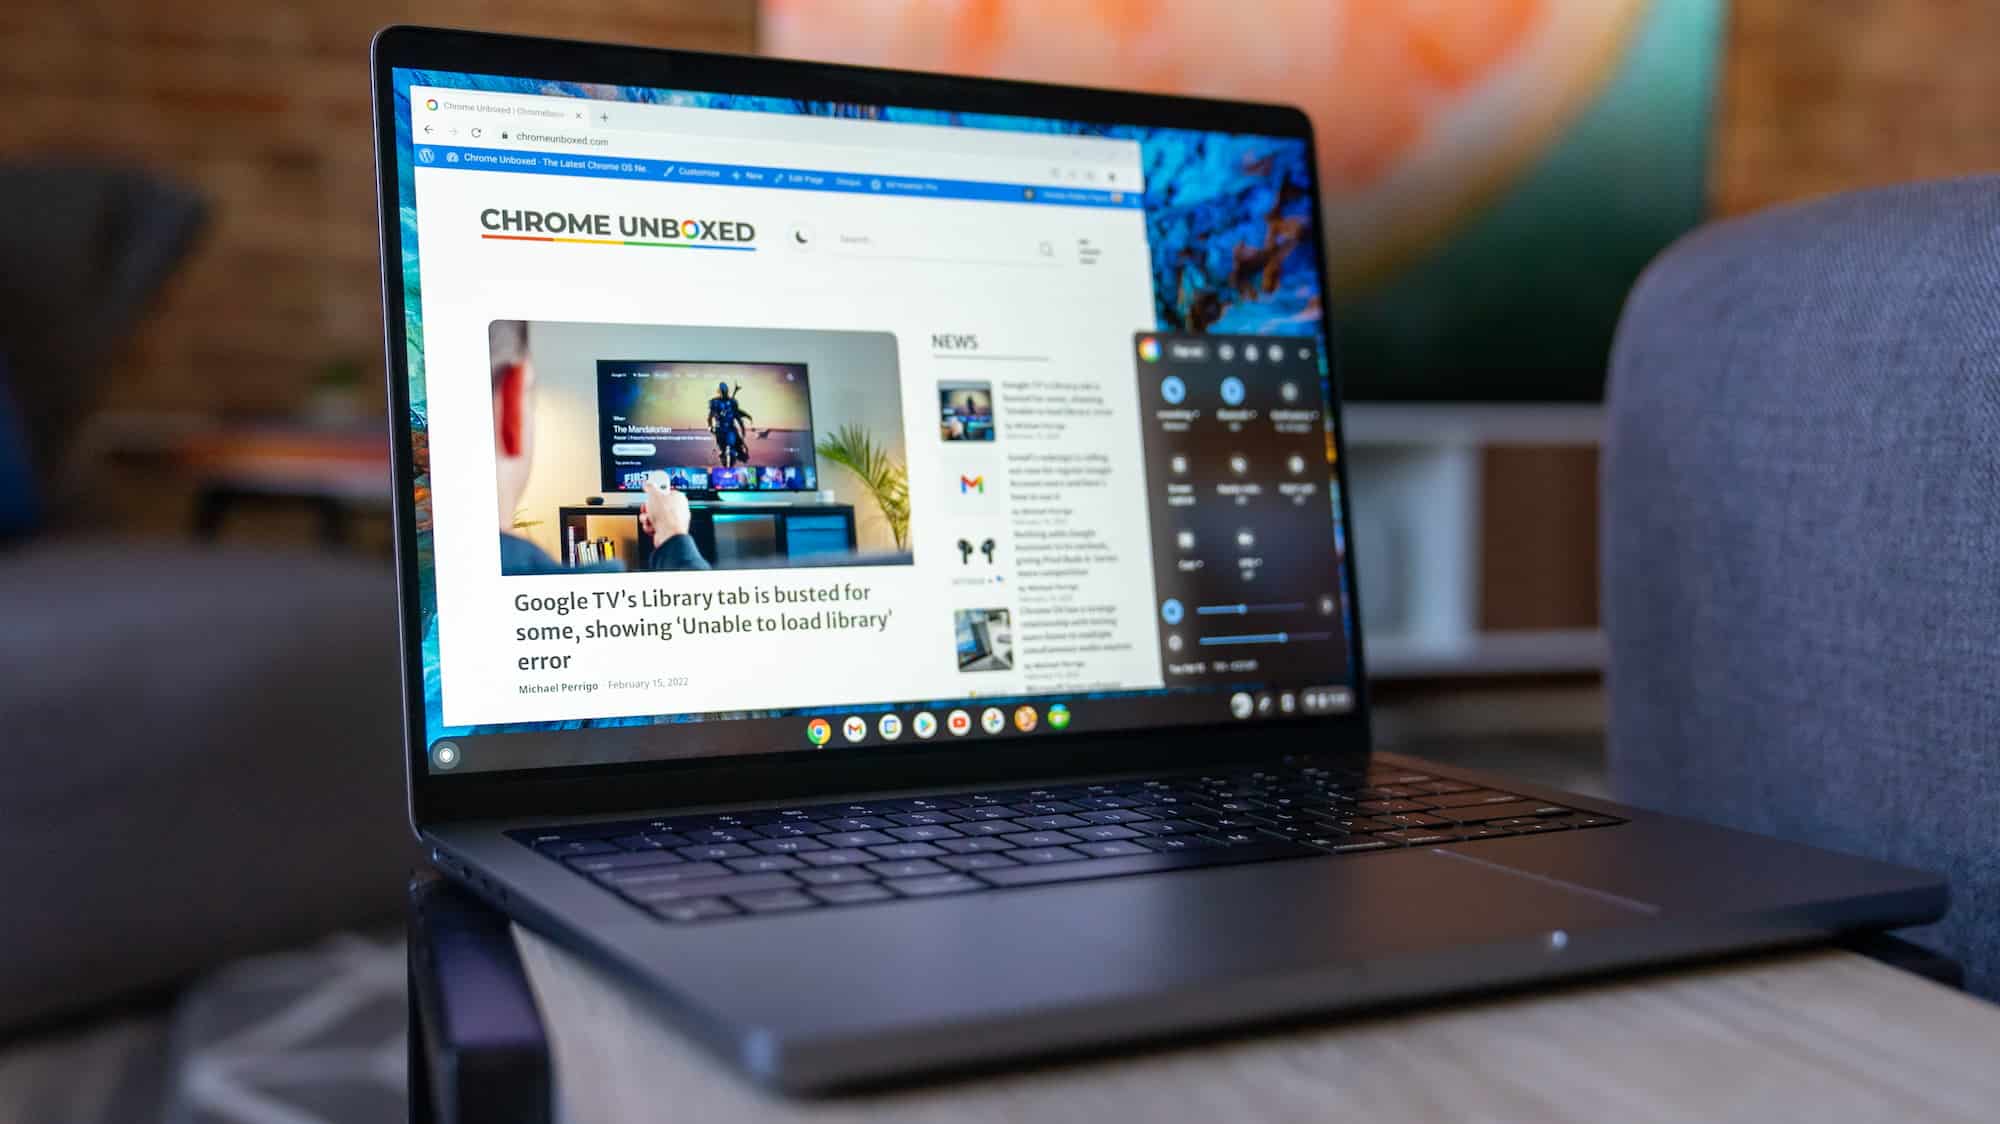 How To Revert A Chrome OS To A Previous Version